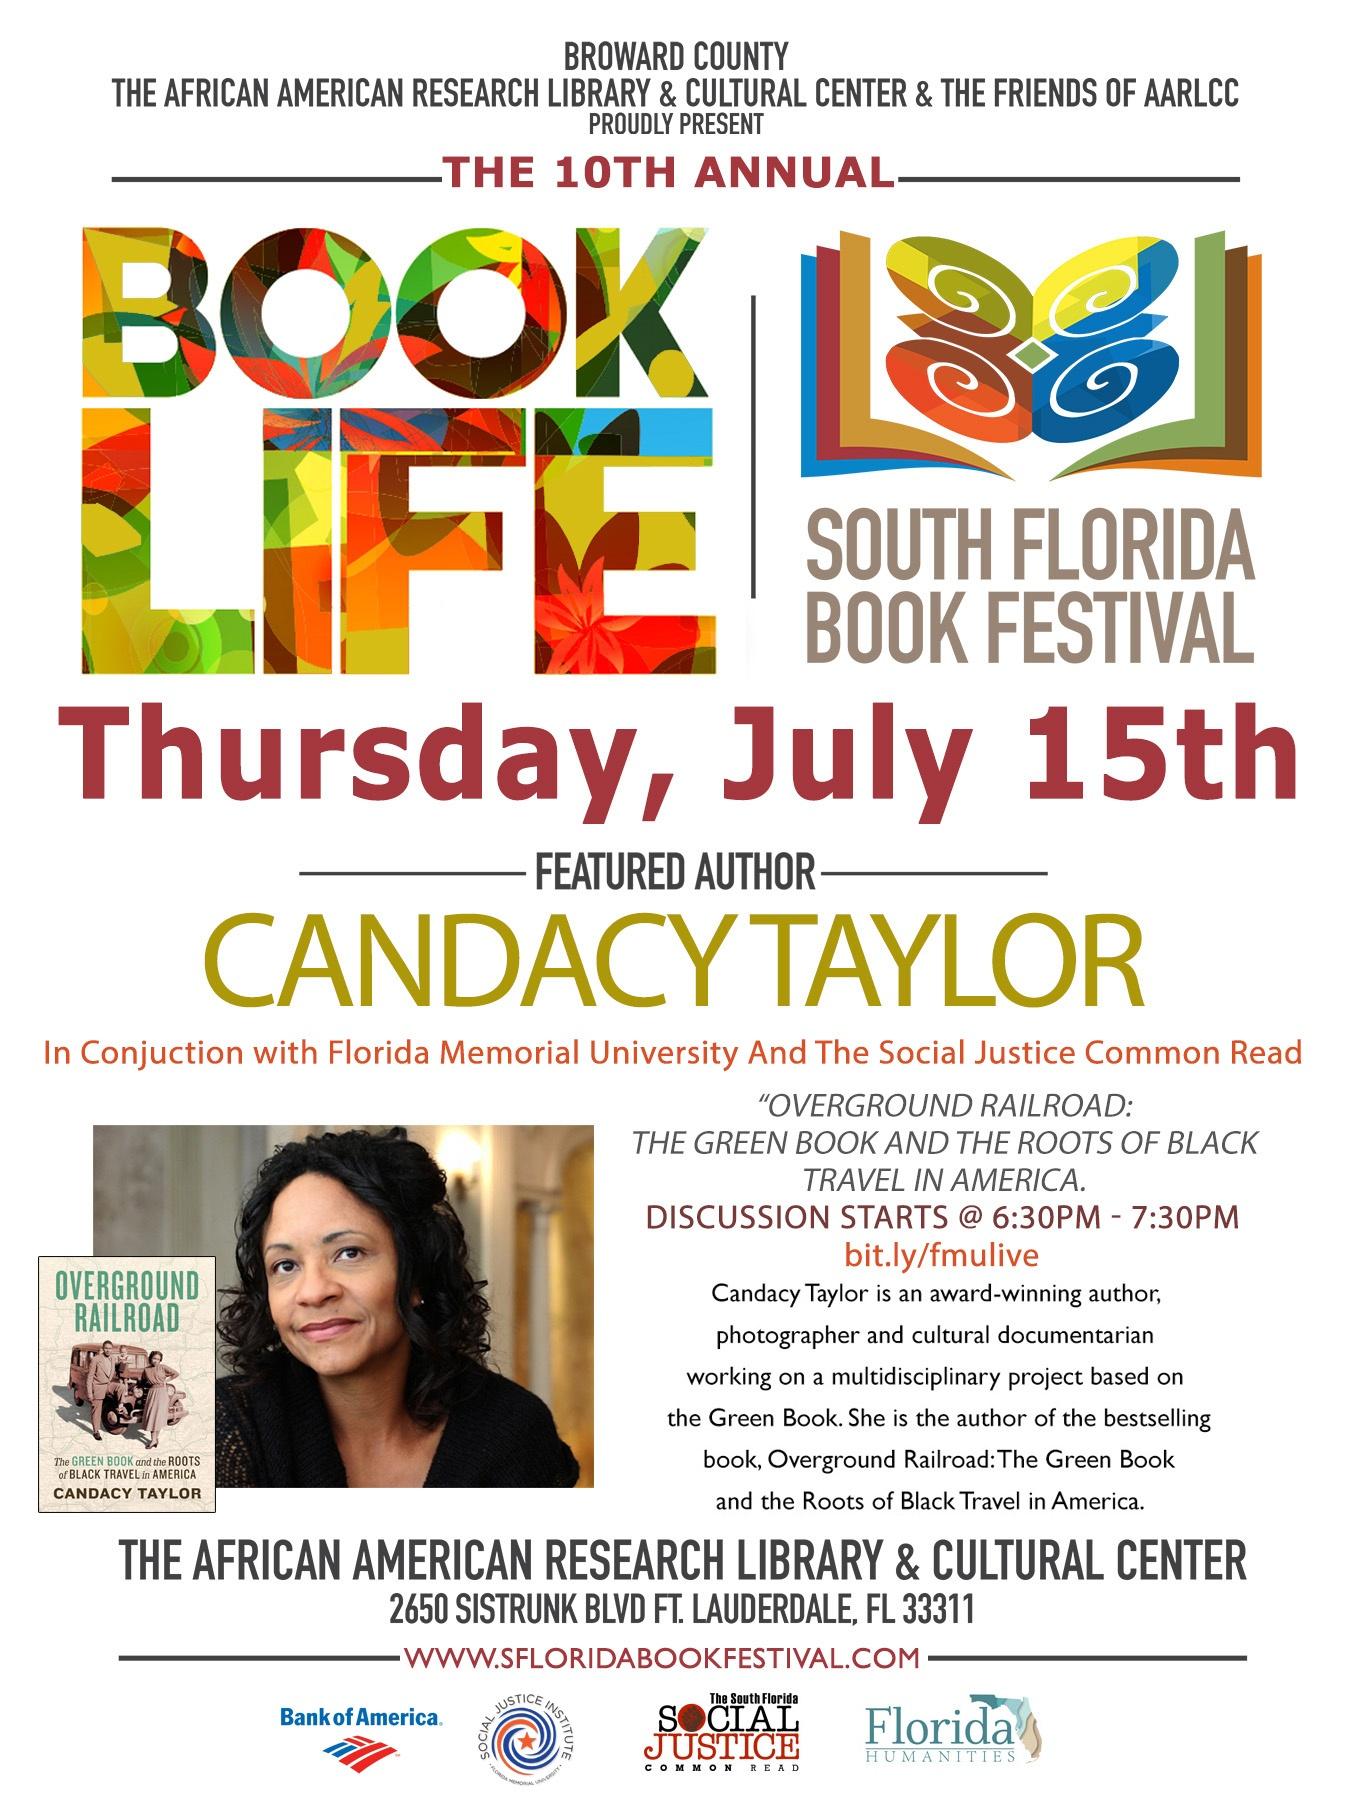 Discussion with Author Candacy Taylor